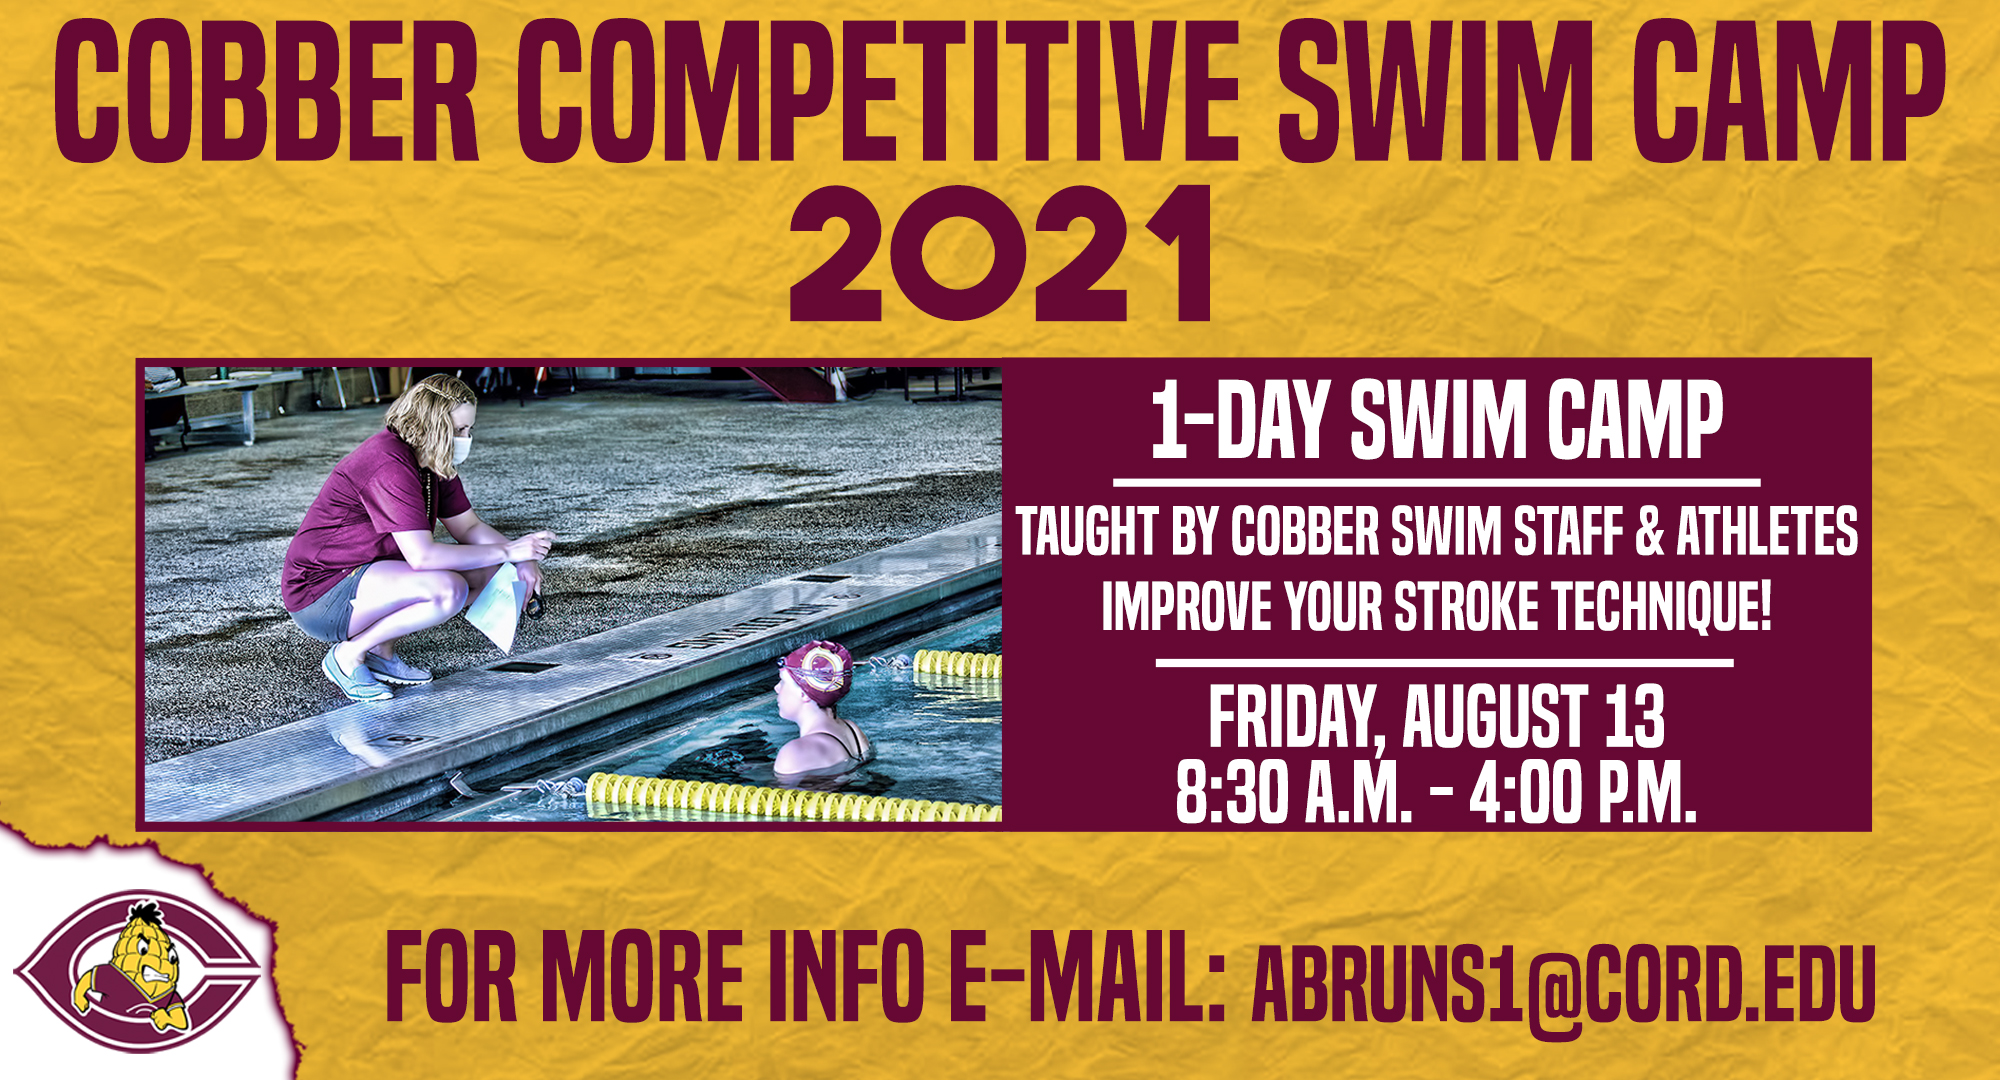 Head Coach Anneliesse Bruns will be hosting the Cobber Competitive Swim Camp on Friday, Aug. 13 which will run from 8:30 a.m. until 4 p.m. The cost of the day-long camp is $75.